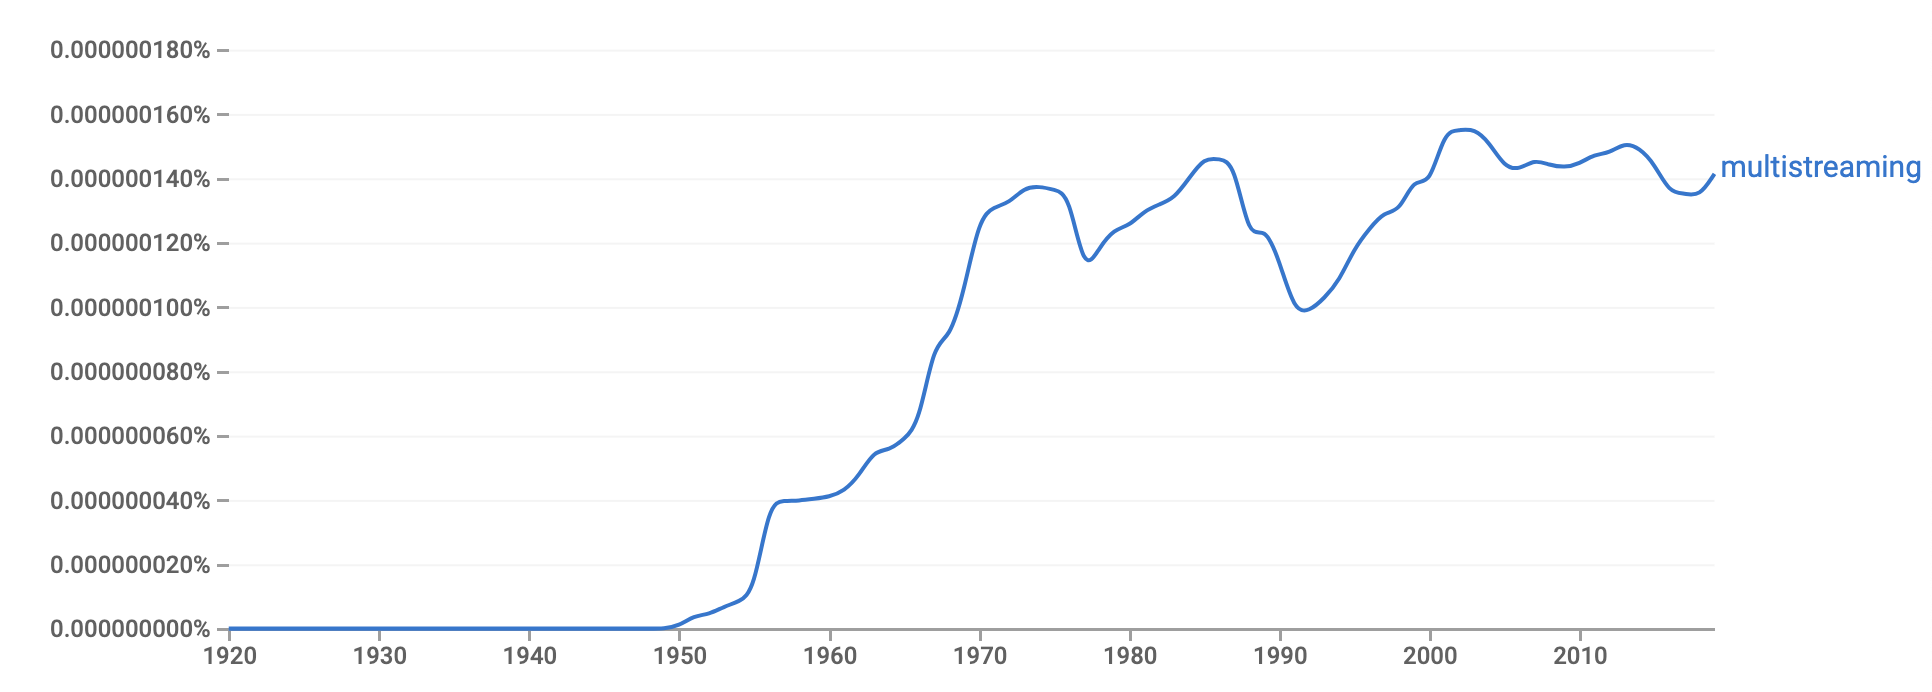 Google Books Ngram Viewer showing growing use of the word multistreaming in everyday lexicon.